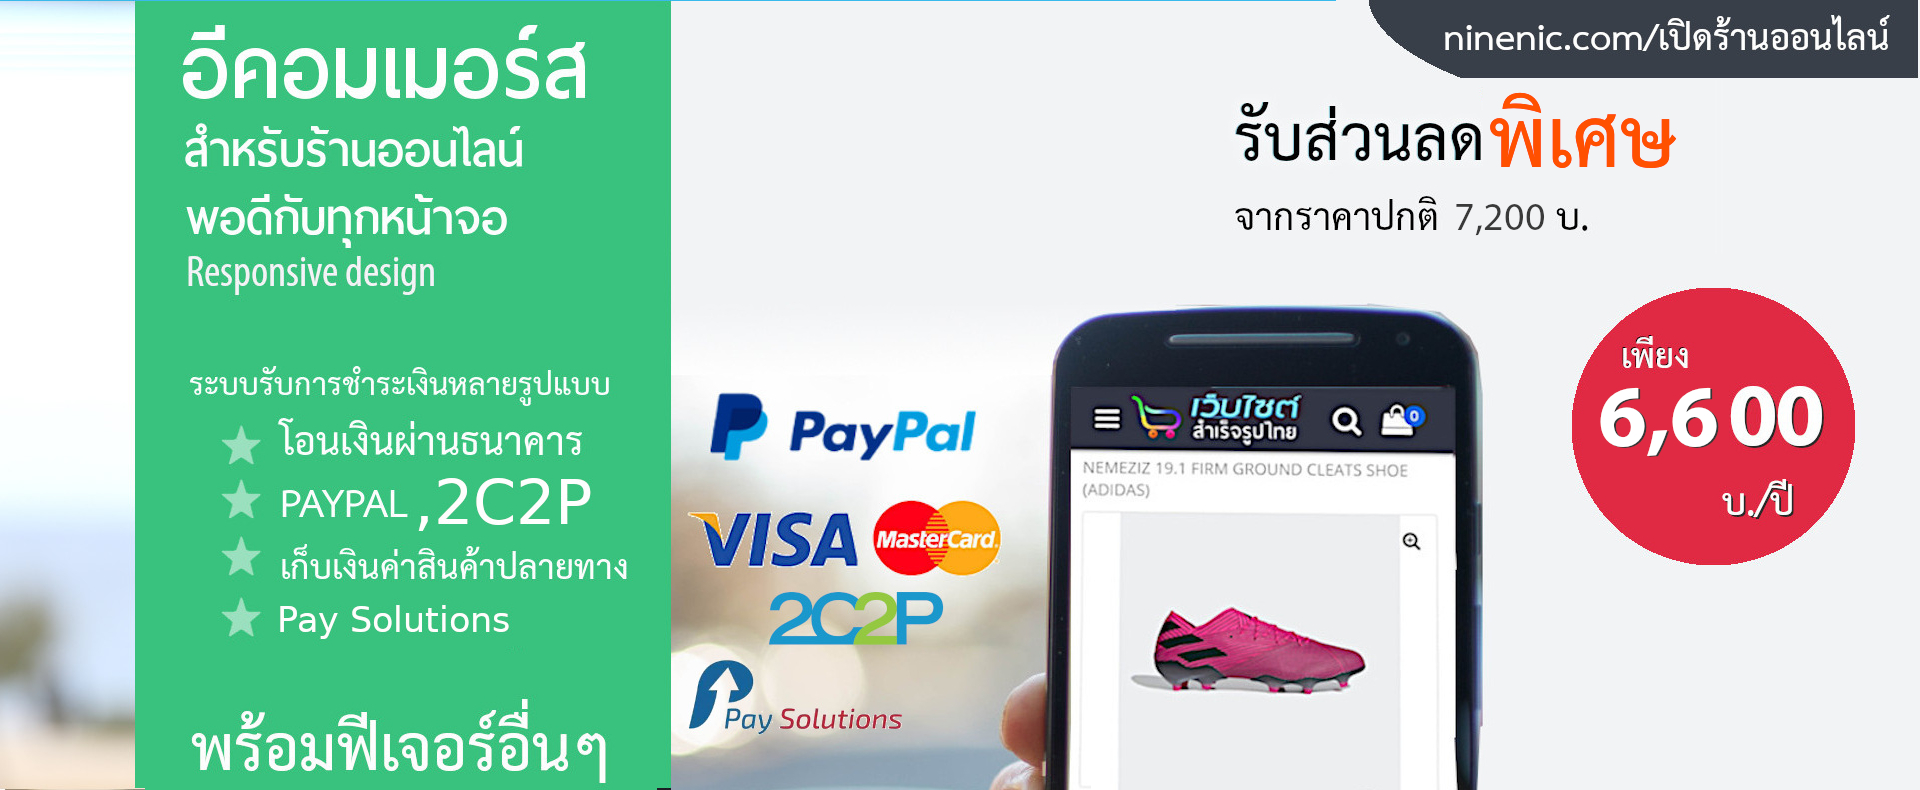 DIY  website builder : Perfectly Ecommerce for your online store with a online shop system and display on mobile phones. Fit for all screens, online shop website only 3510 baht / yr.Get 10% discpunt (from 3900 baht) free! domain ,SSL certificate,website template and many more. ecommerce shop  give you more  website service to help you get started. Quickly your online store with professional design